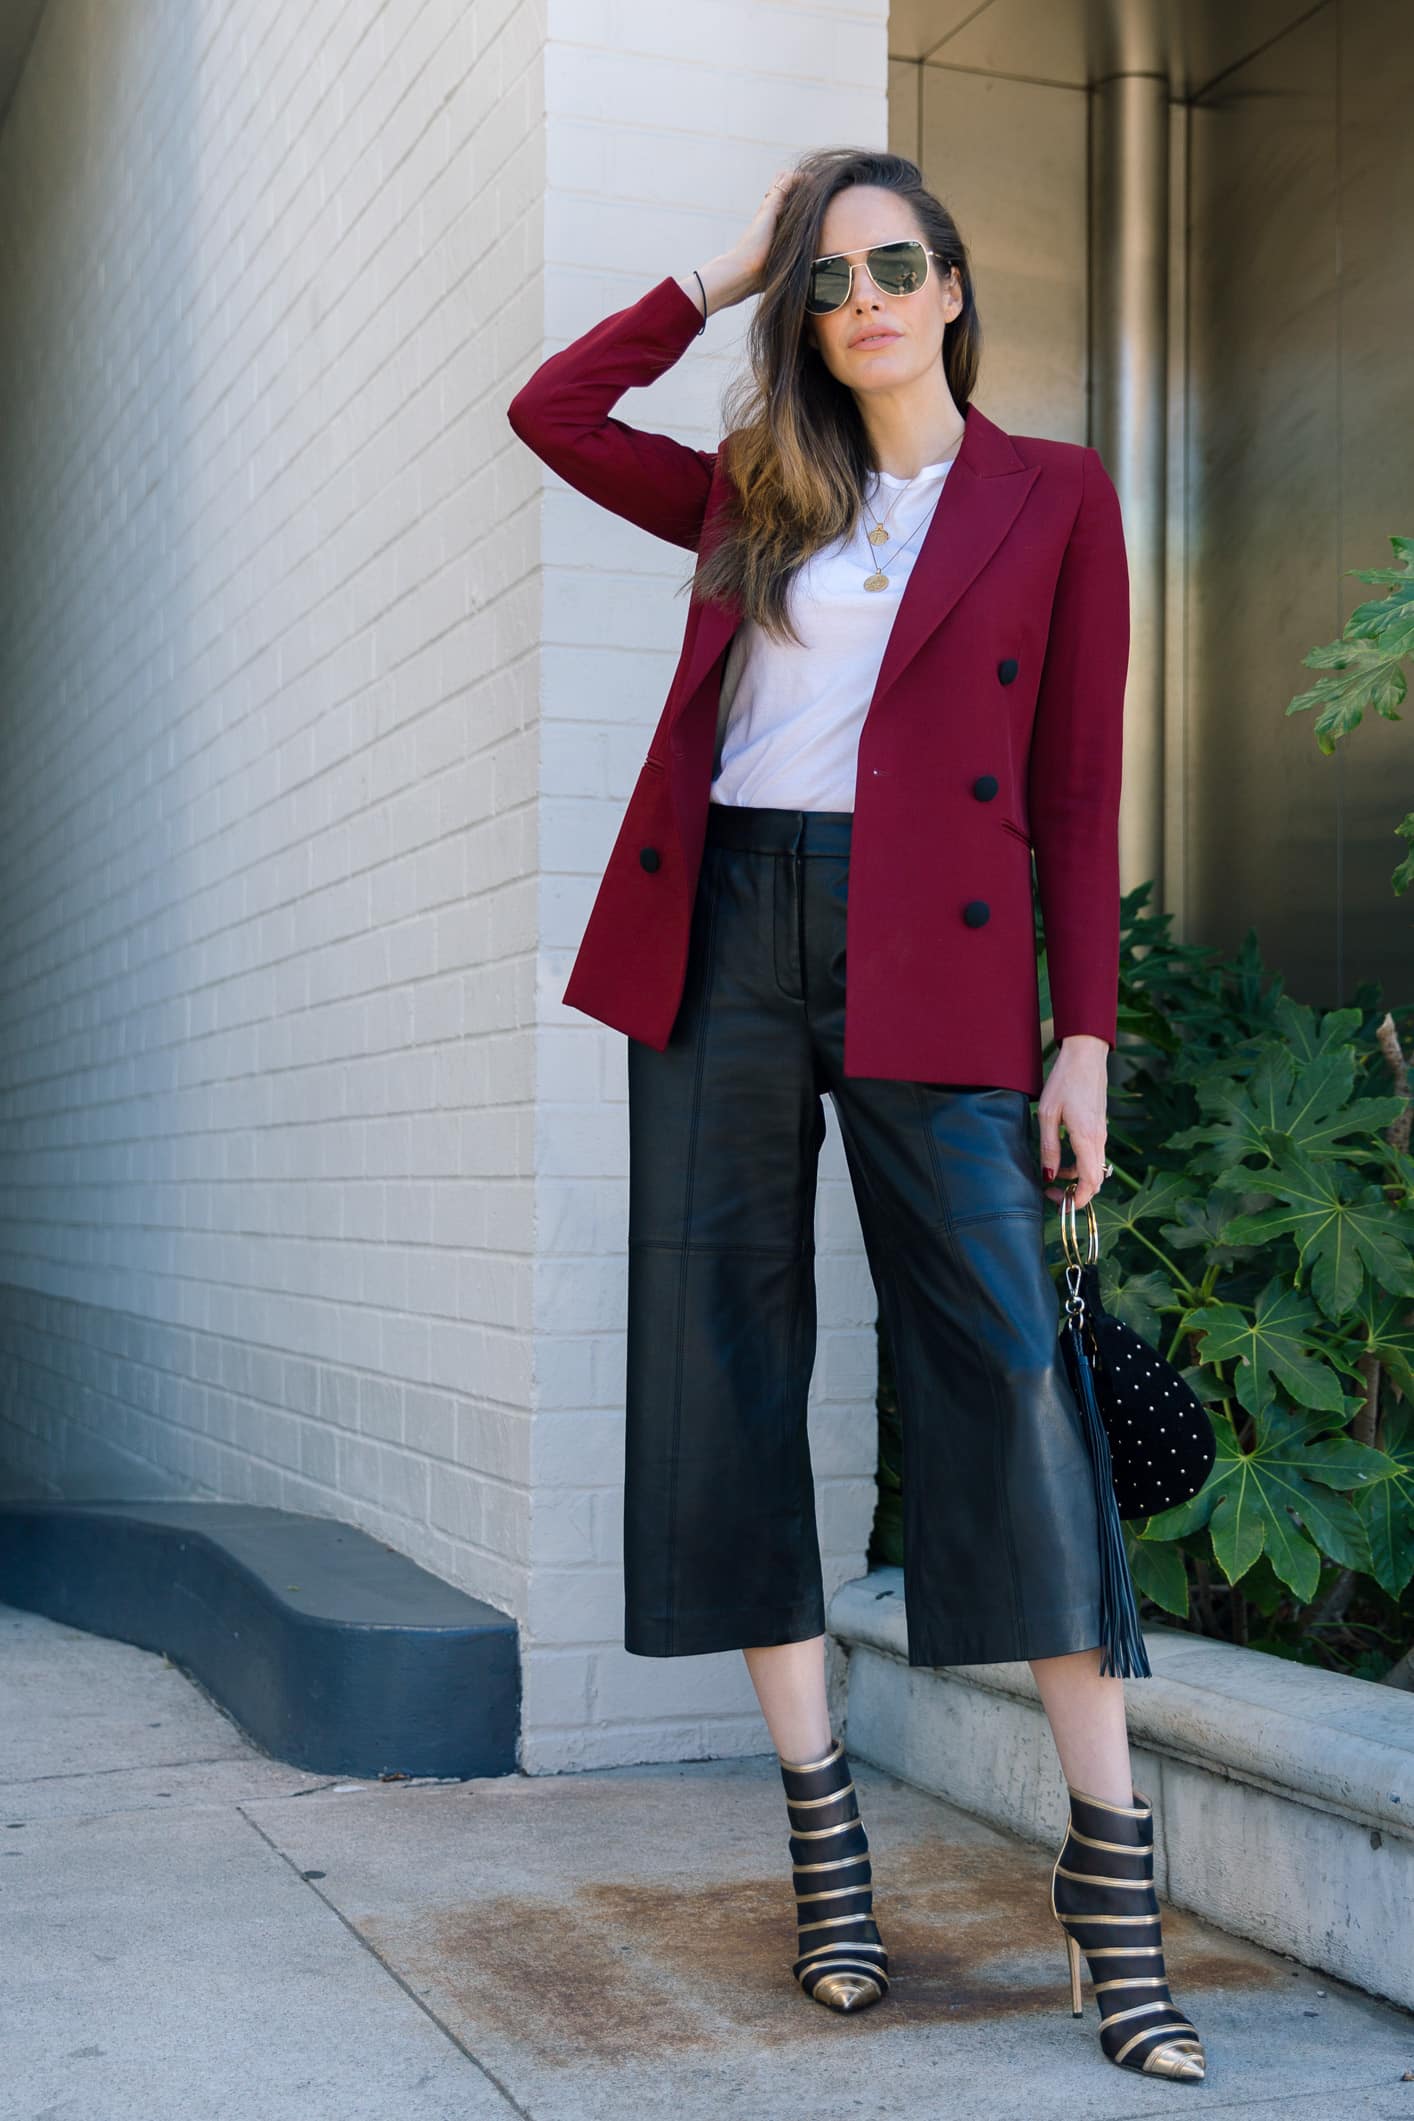 Louise Roe wearing Farrah and Sloane Spring Handbags Blazer Jimmy Choo Boots Leather Culottes and Quay Sunglasses